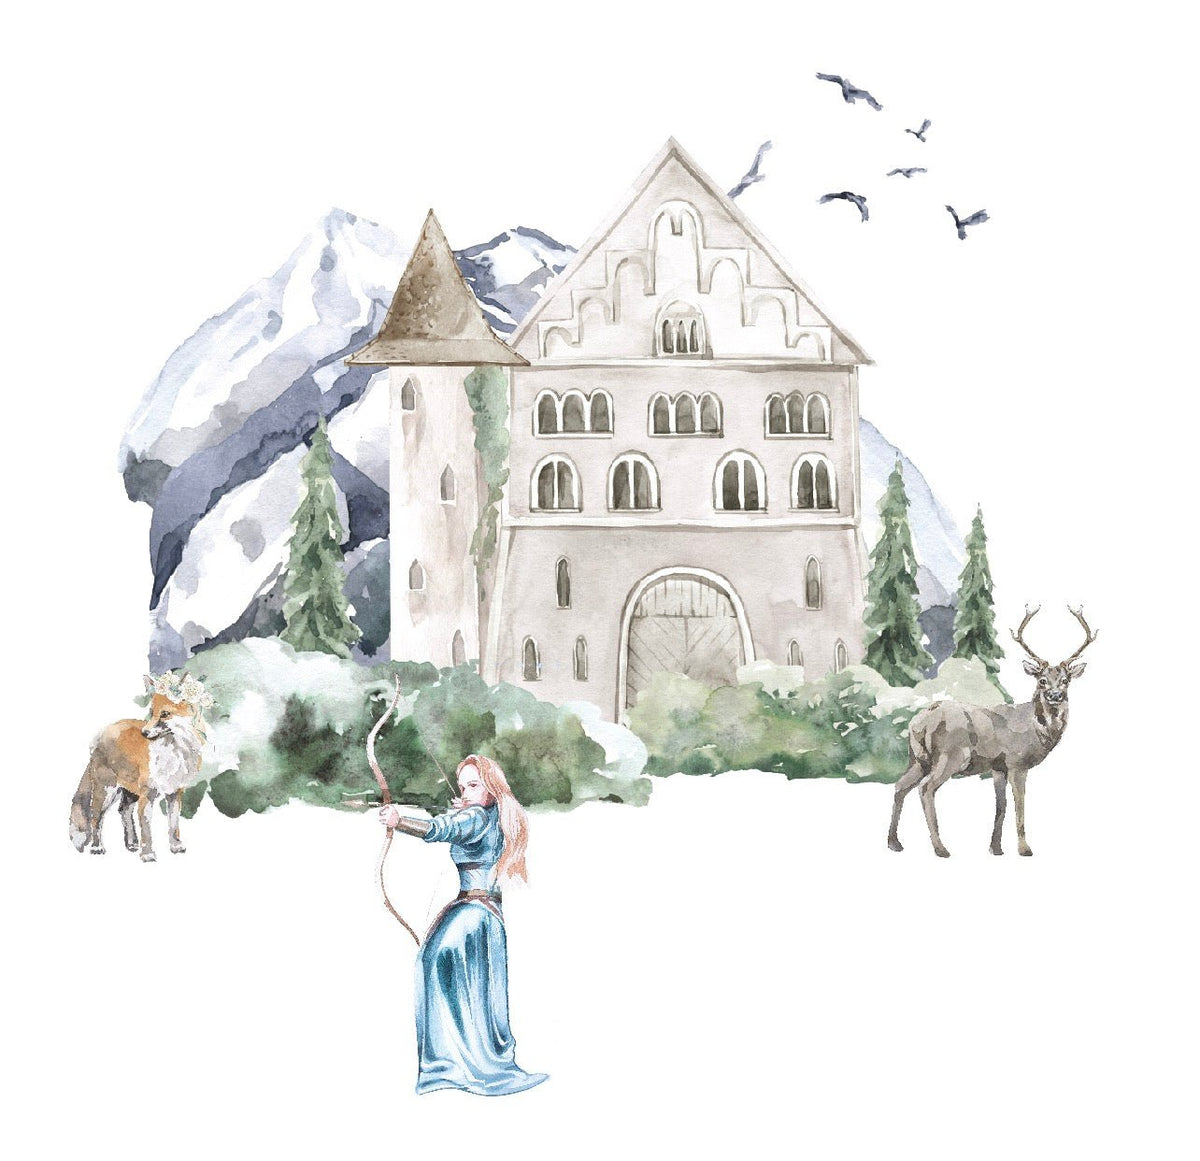 Cover-Alls Fairytale Castle Decals illustration with mountains in the background, a princess figure in blue playing a harp, deer, and birds flying overhead.